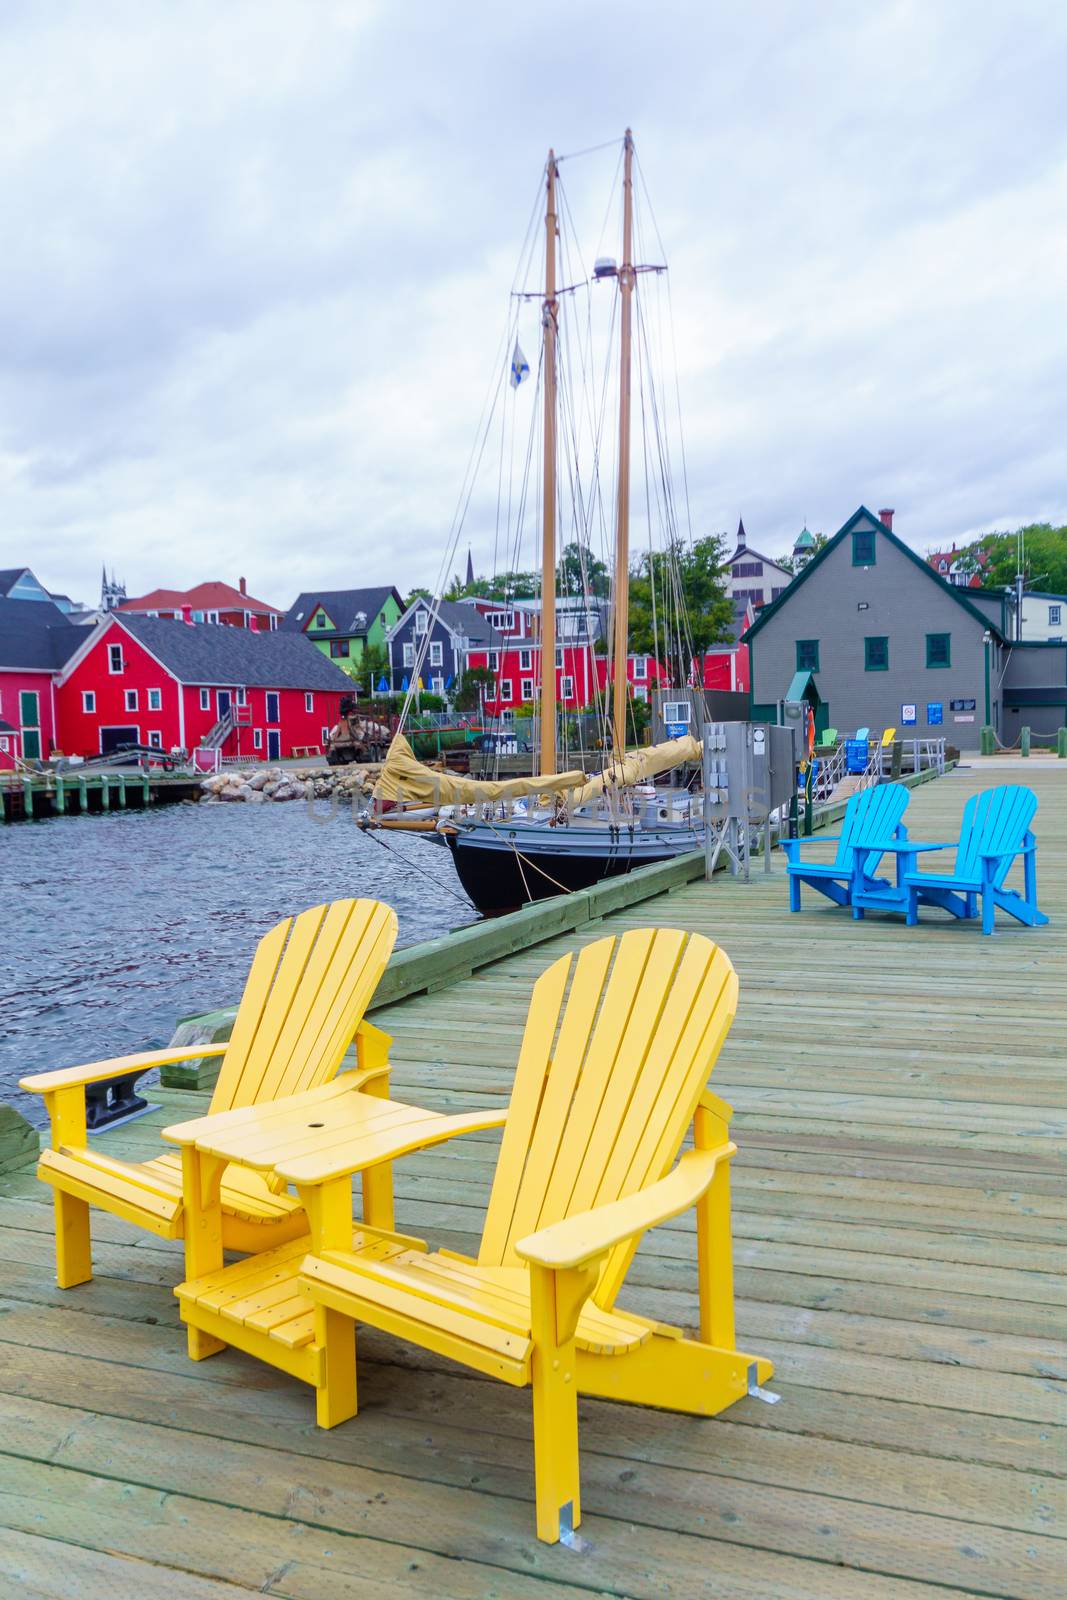 Pier with colorful chairs, in Lunenburg by RnDmS